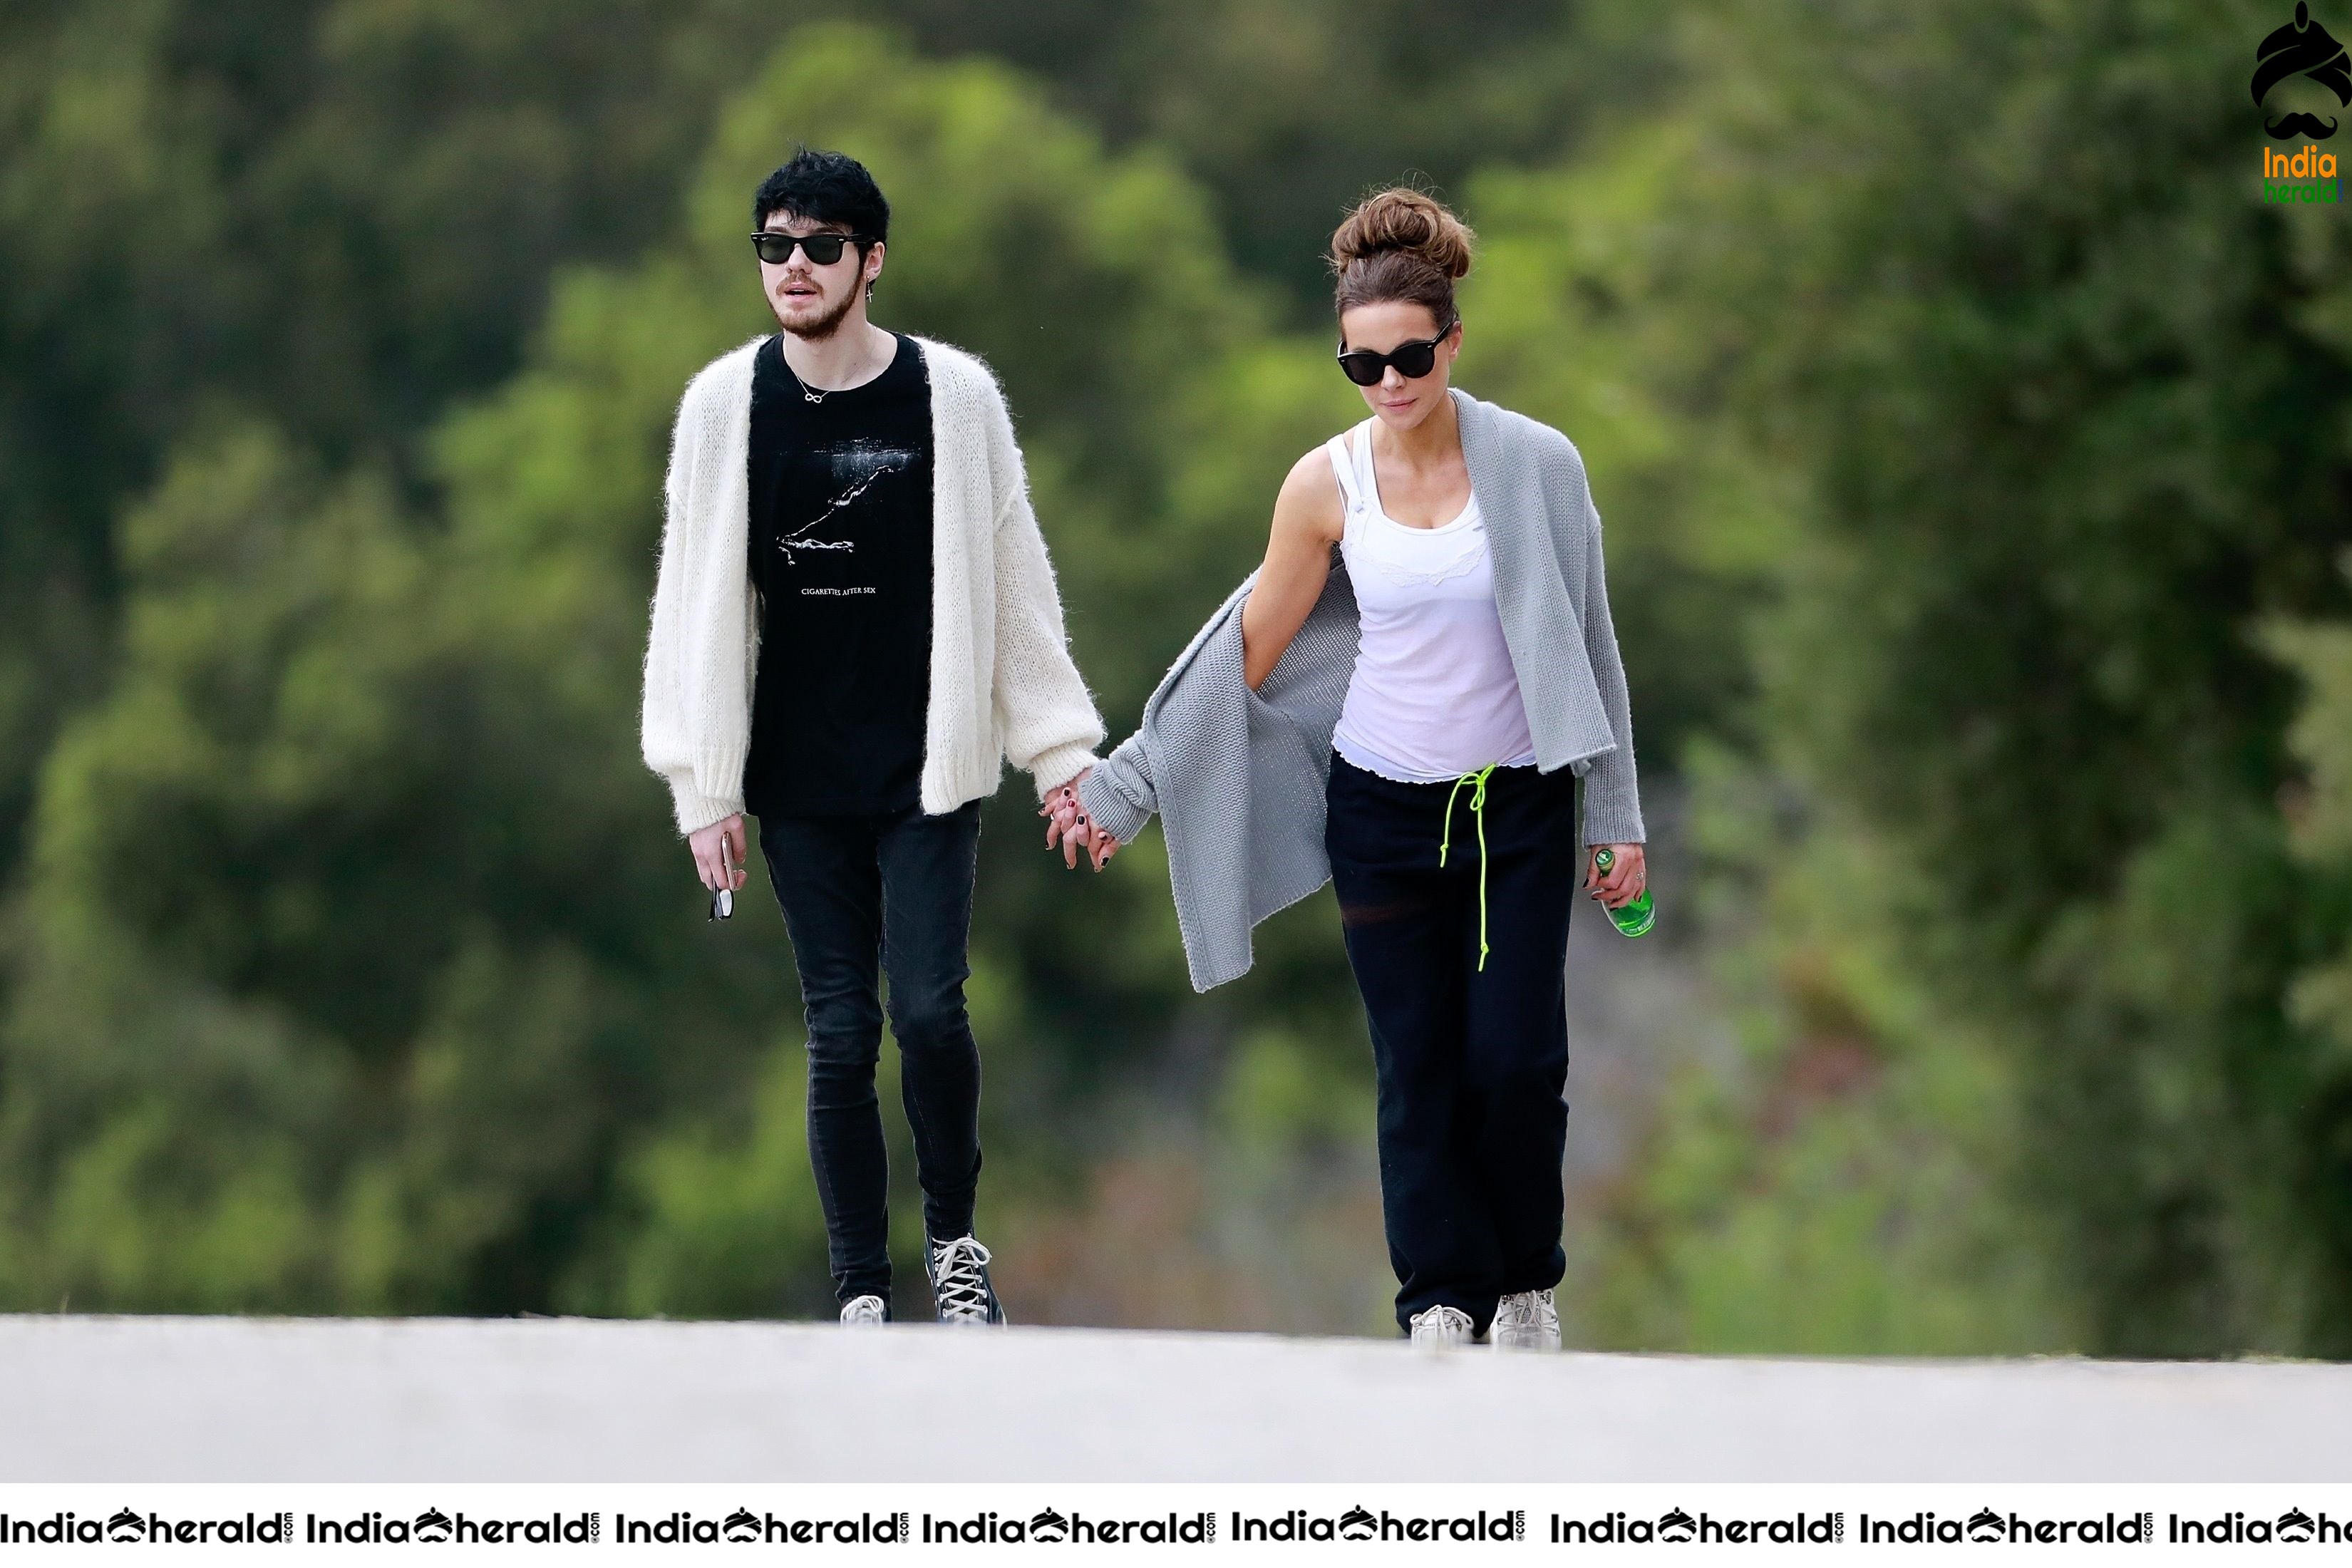 Kate Beckinsale takes a walk with her Boyfriend in Brentwood during Lockdown